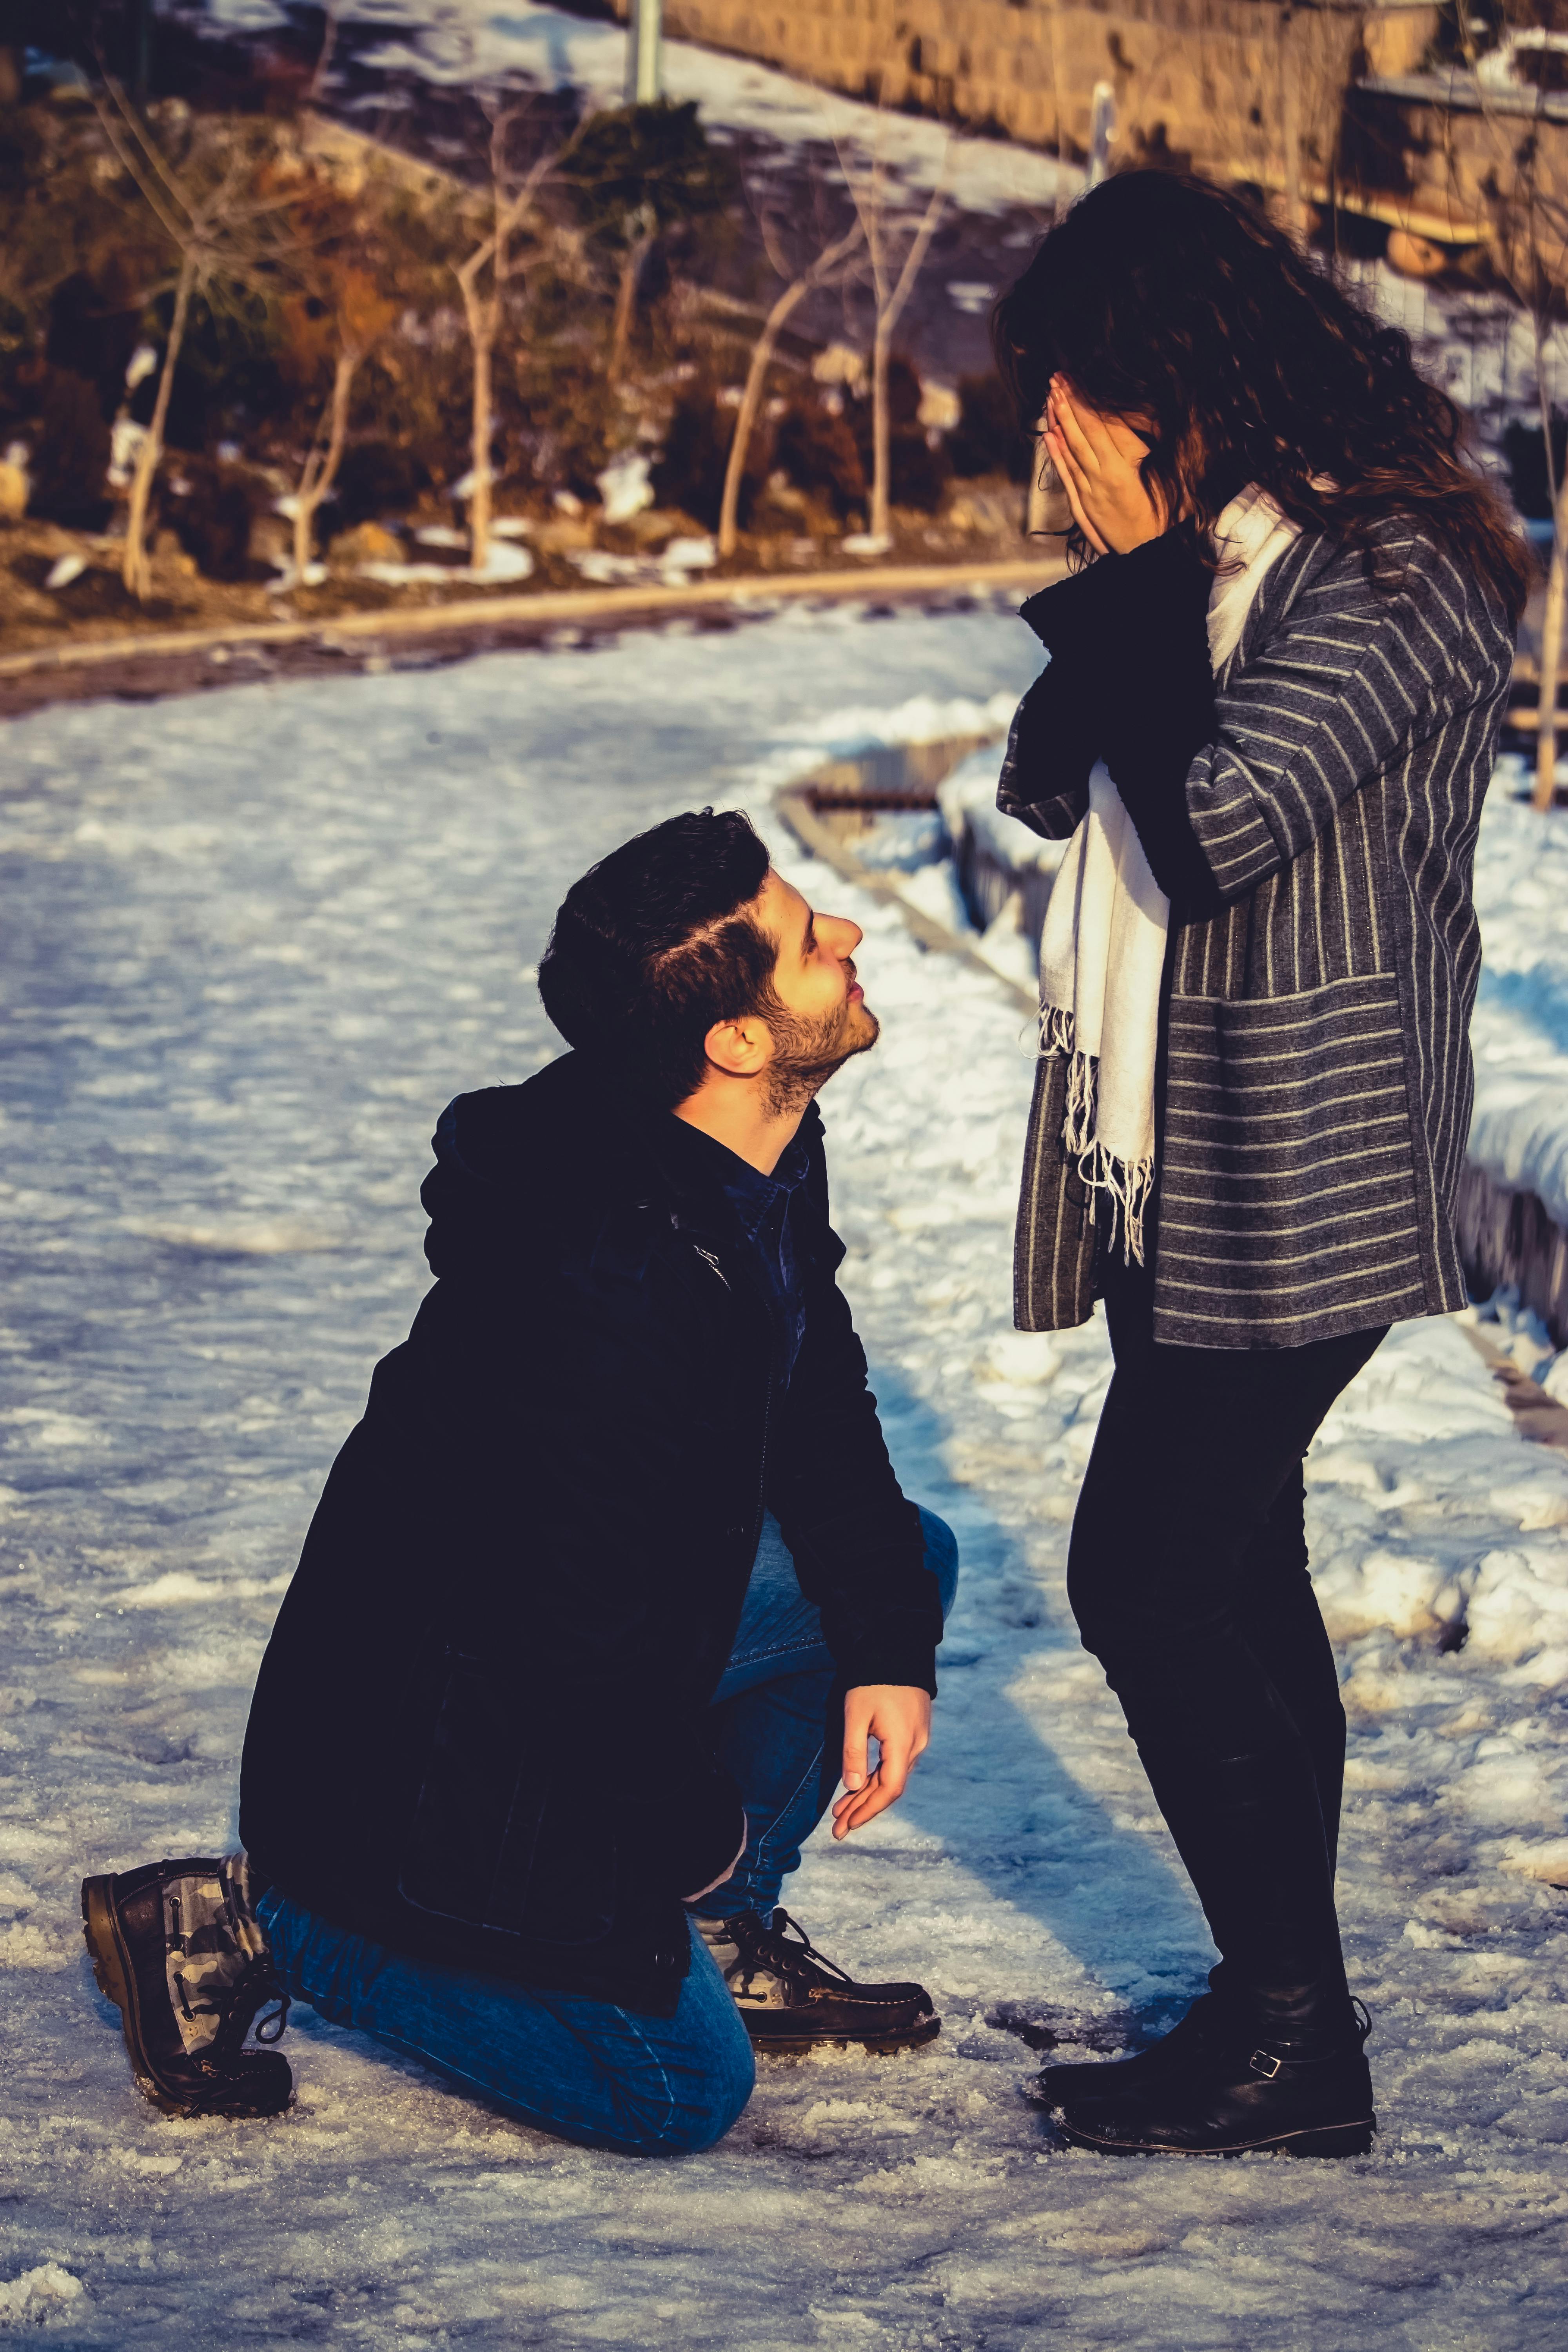 Man kneeling in front of a woman | Photo: Pexels